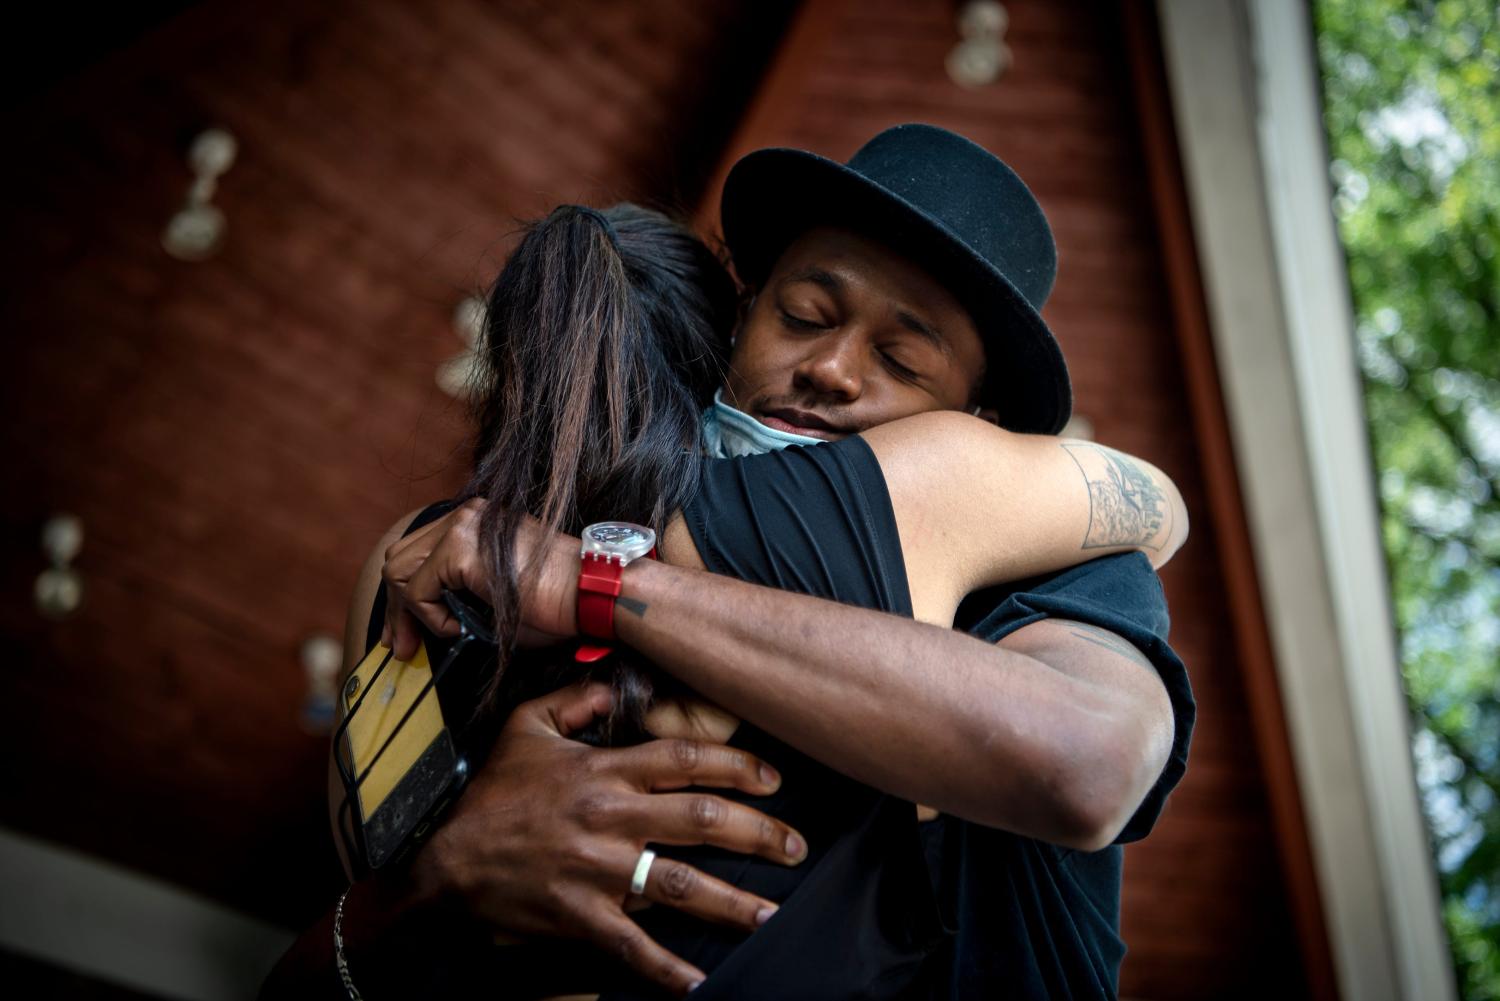 Isaiah Stratton, 24 of East Rutherford hugs Jasmyne Mena, 23 of Rutherford, organizer of a Black Lives Matter march and rally held in Rutherford in response to the killing of George Floyd and other Black Americans. Stratton spoke during the rally at Lincoln Park on Sunday, June 7, 2020.News George Floyd Black Lives Matter